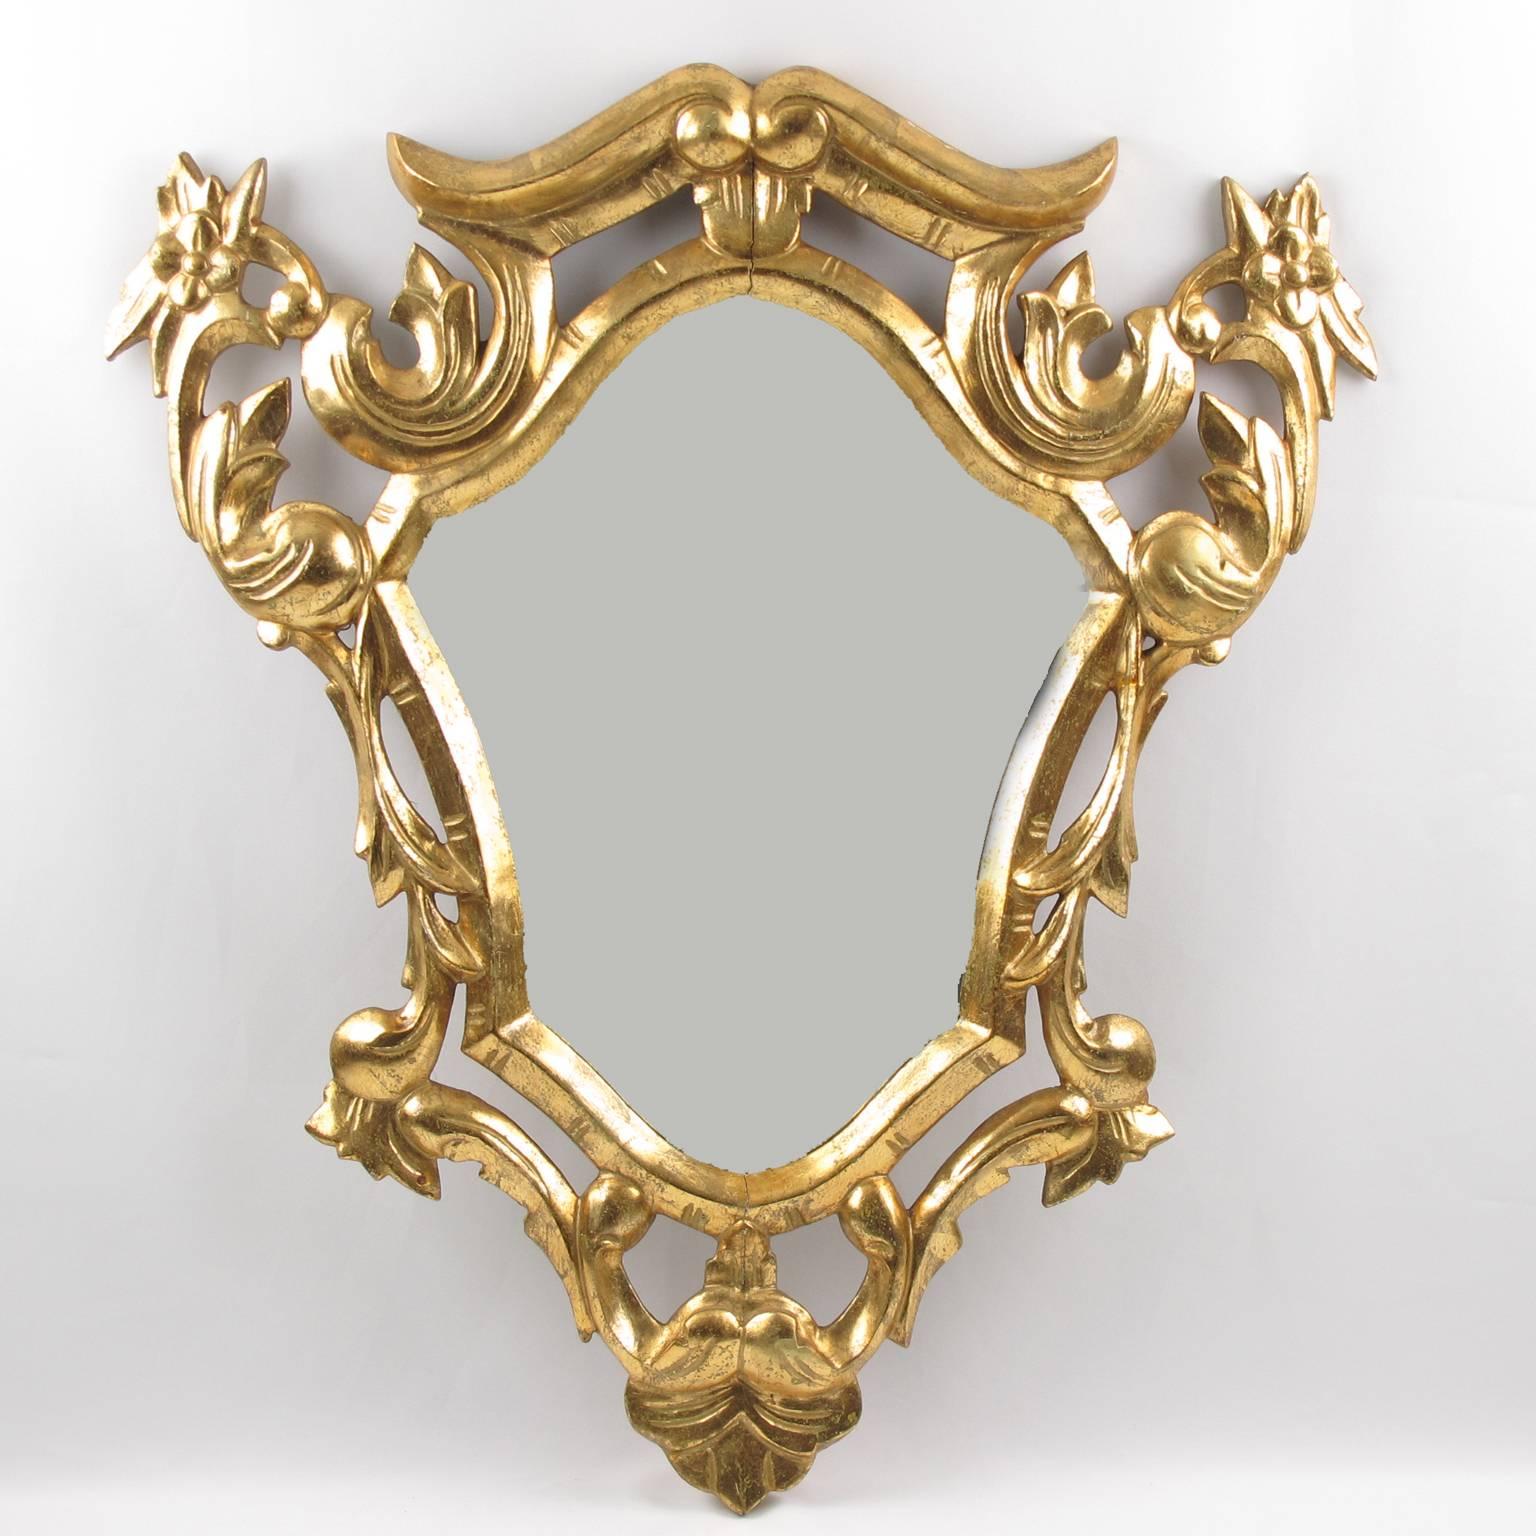 Elegant early 20th century French giltwood mirror in a Louis XV Rococo style. Hand-carved and gold leaf frame with elaborate pierced and see thru floral design. Original mirror reflector is useful throughout the surface. Gold leaf in good vintage